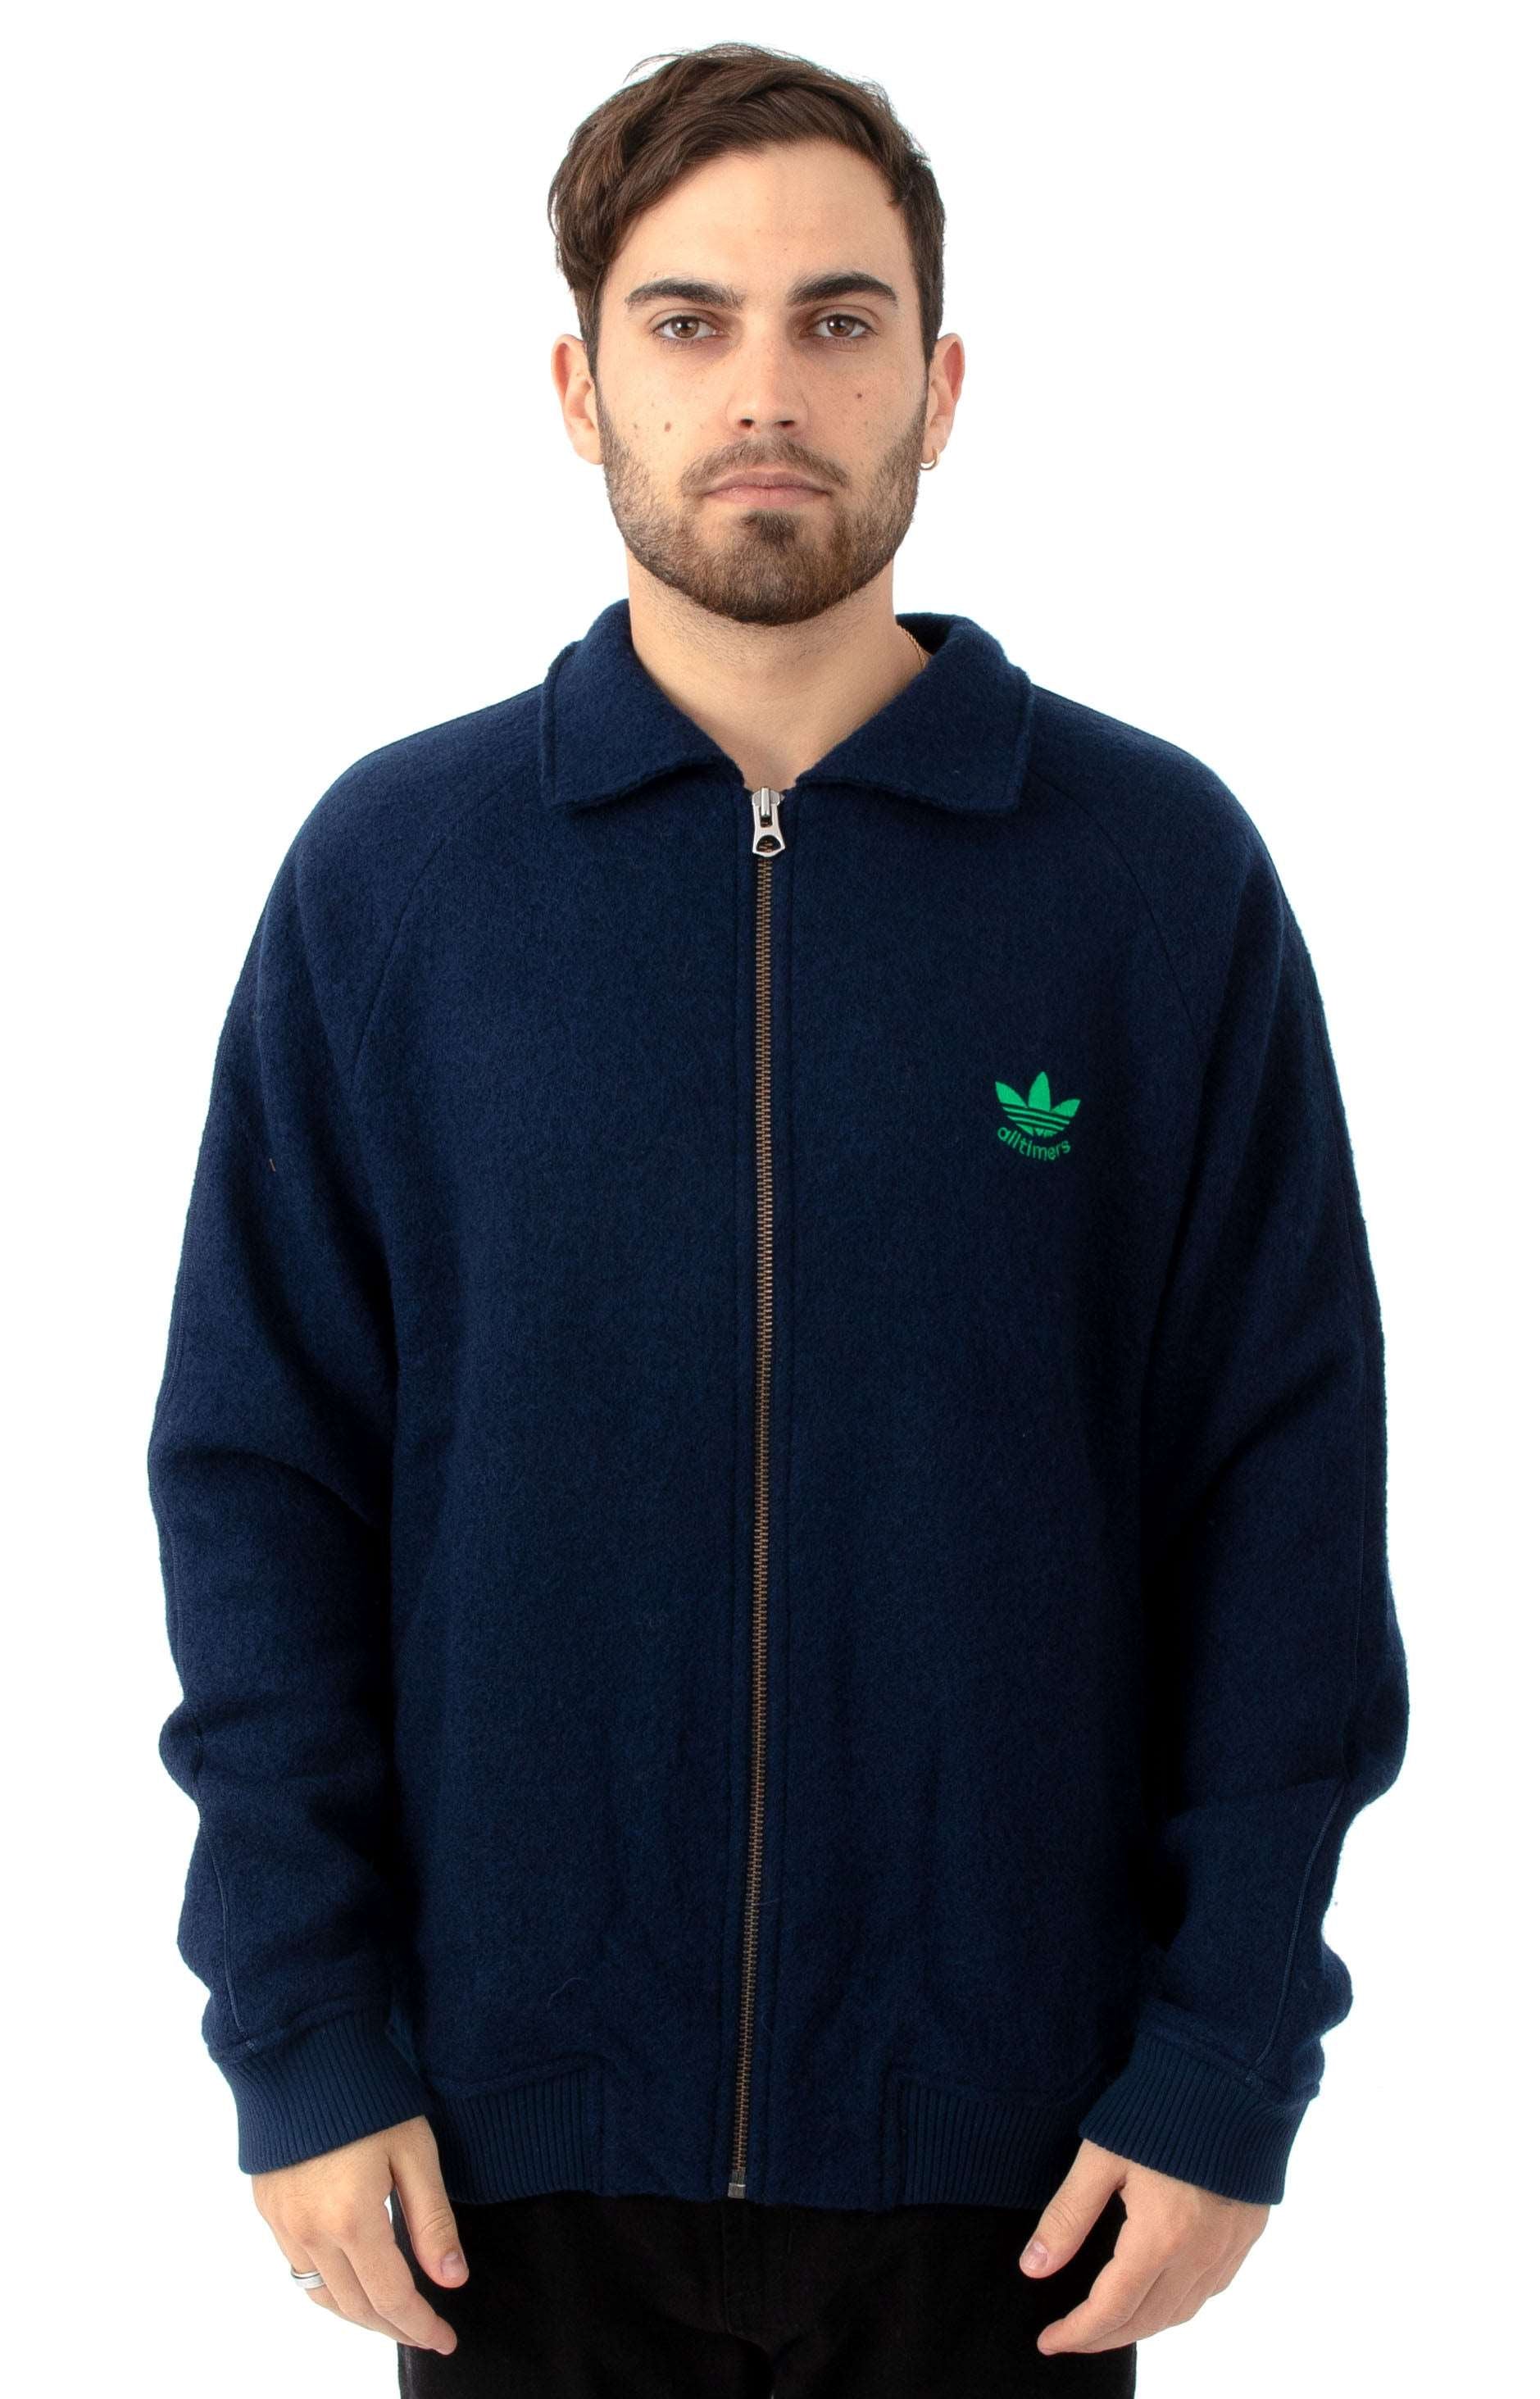 All Timers Jacket - Collegiate Navy/Green